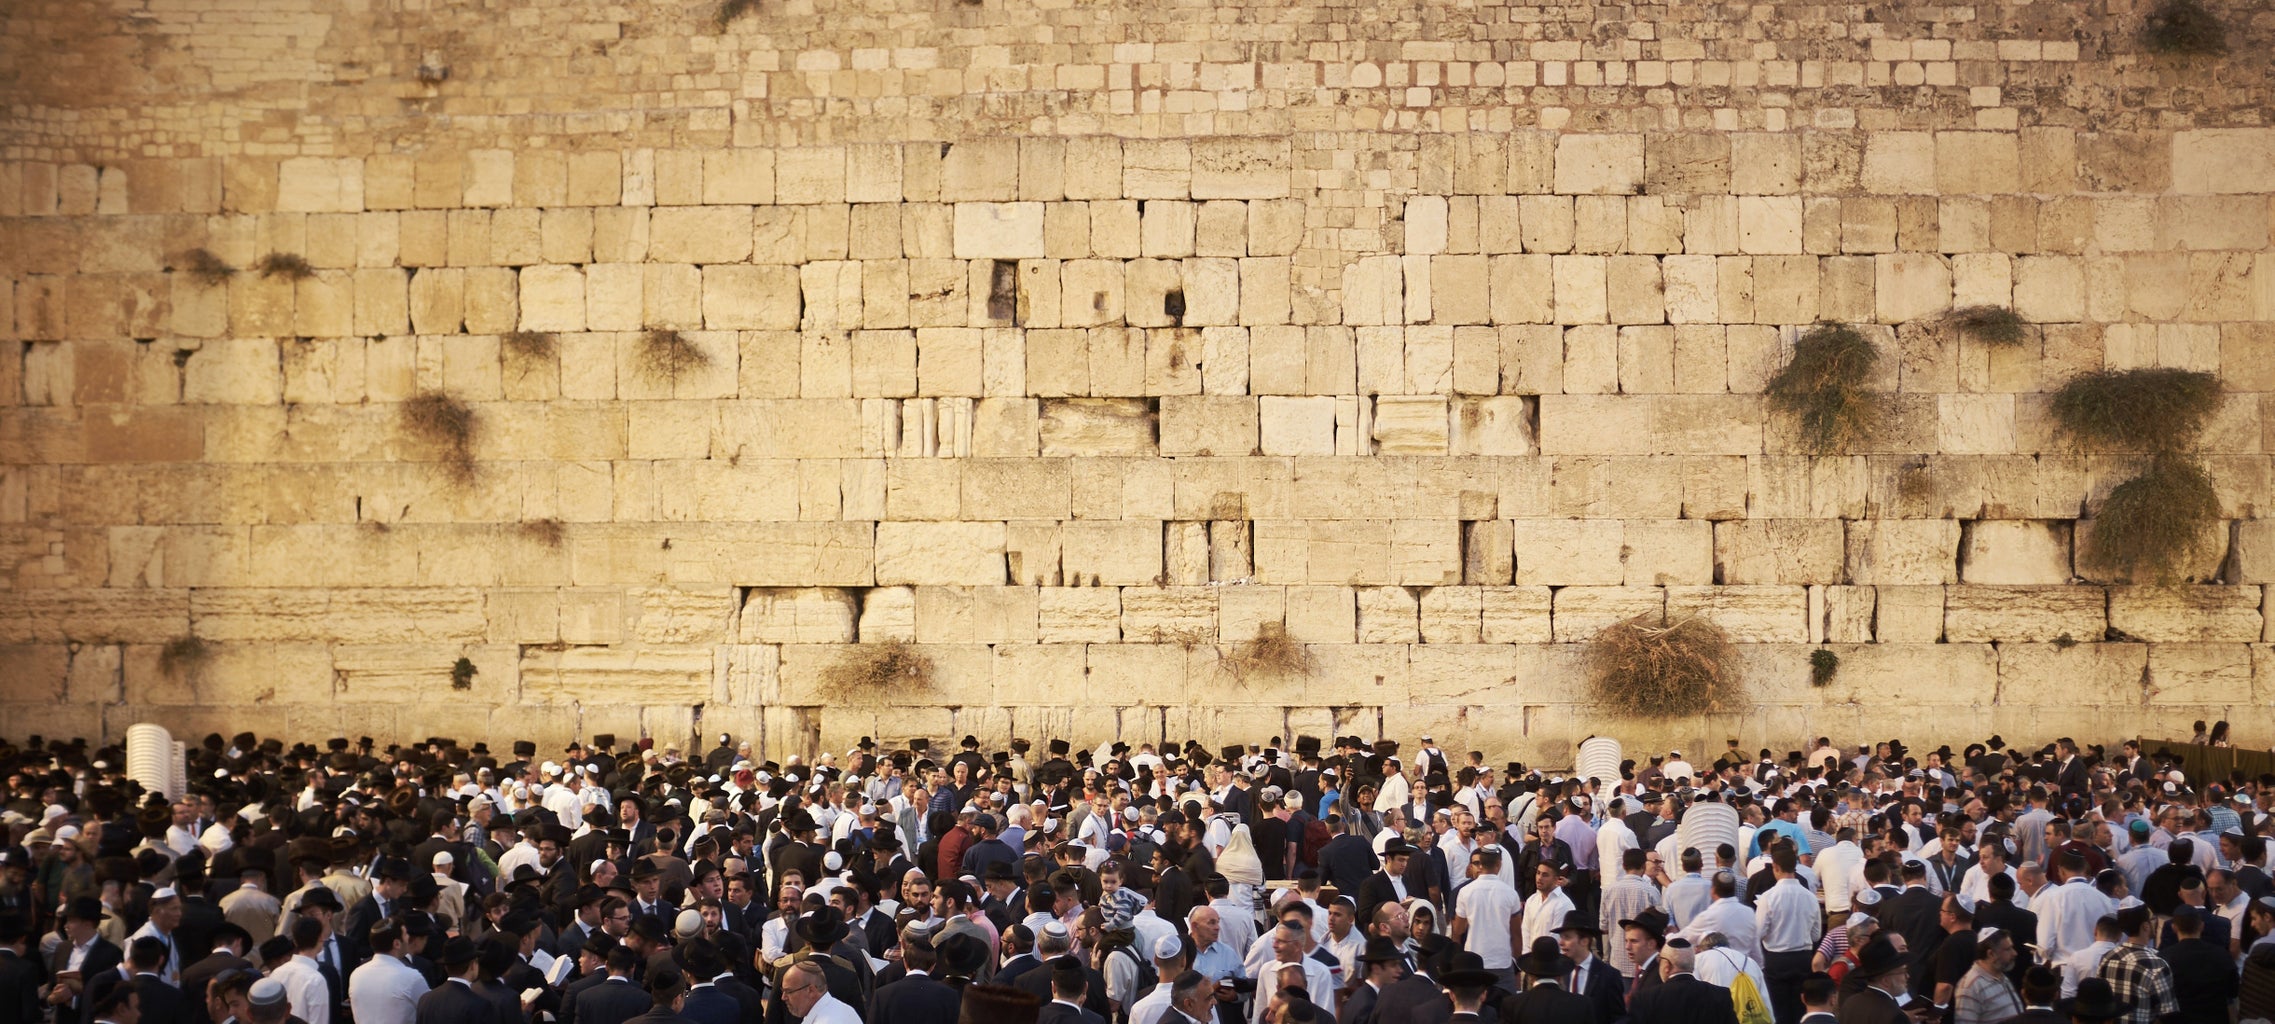 People gathered at the Wailing Wall in Jerusalem